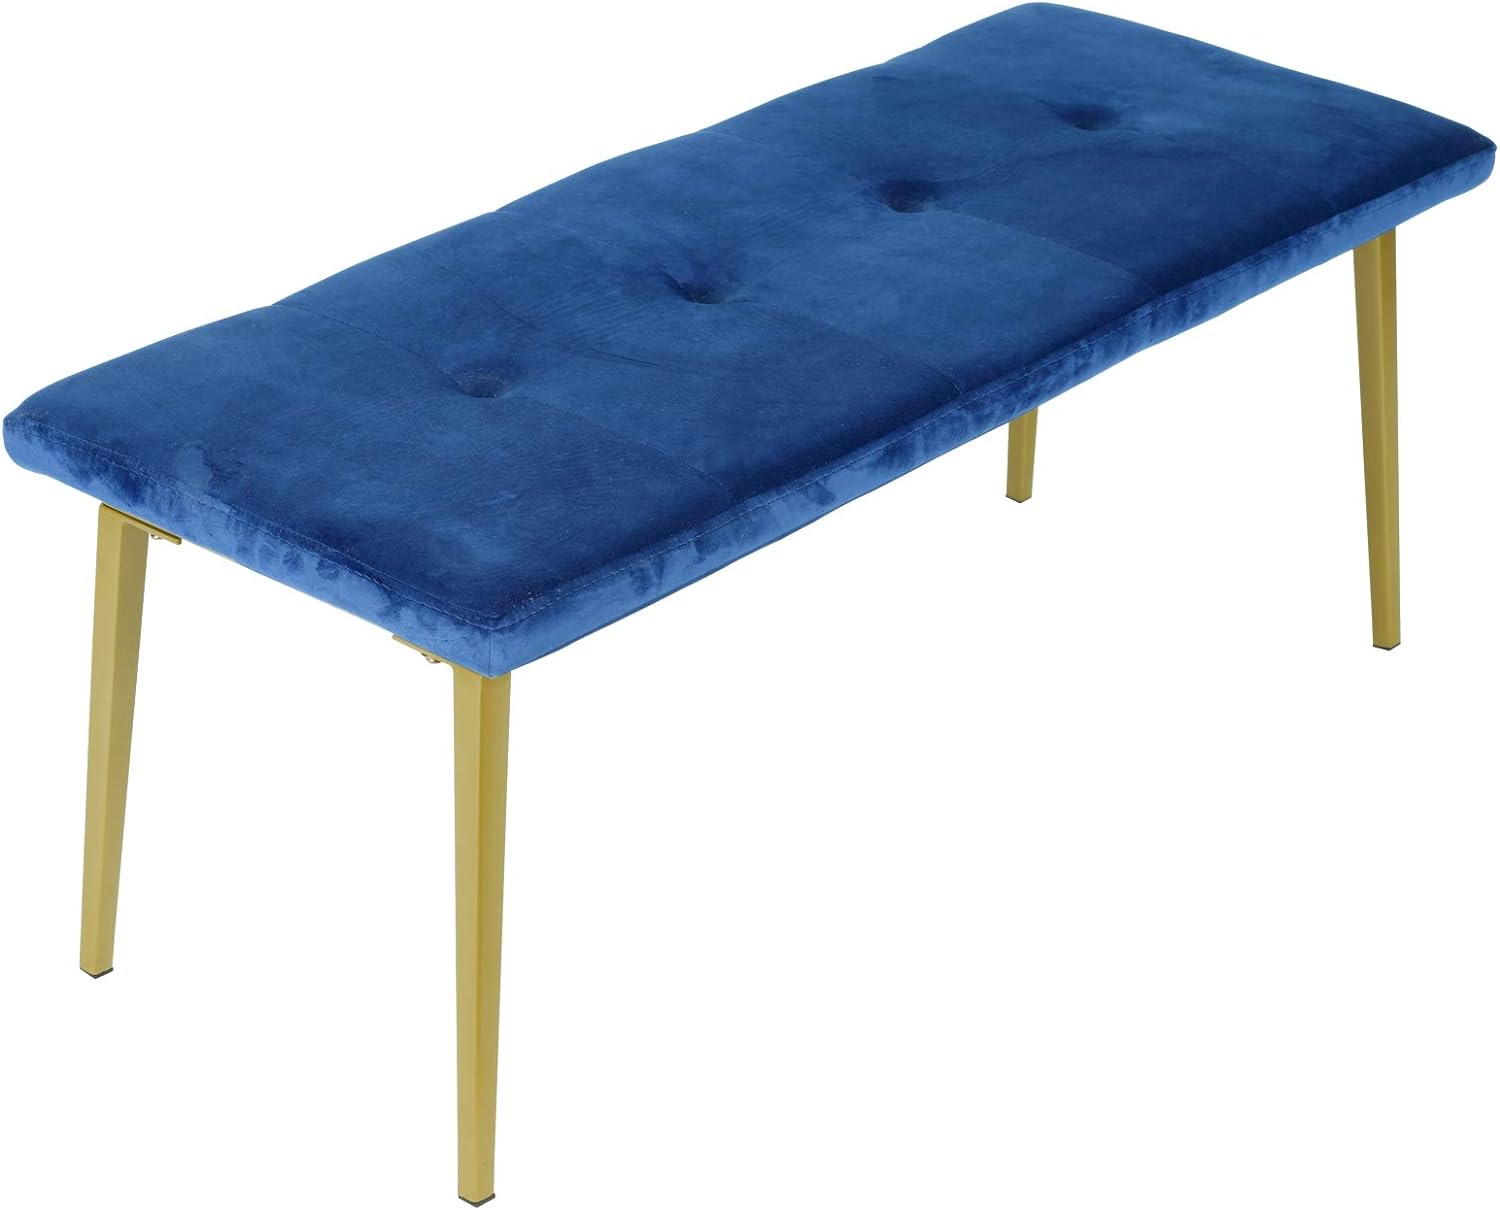 Moncot Entryway Bench, End of Bed Bench, Fabric Ottoman Bench Metal Legs, Dining Bench for Bedroom, Entryway and Hallway (Navy Blue)